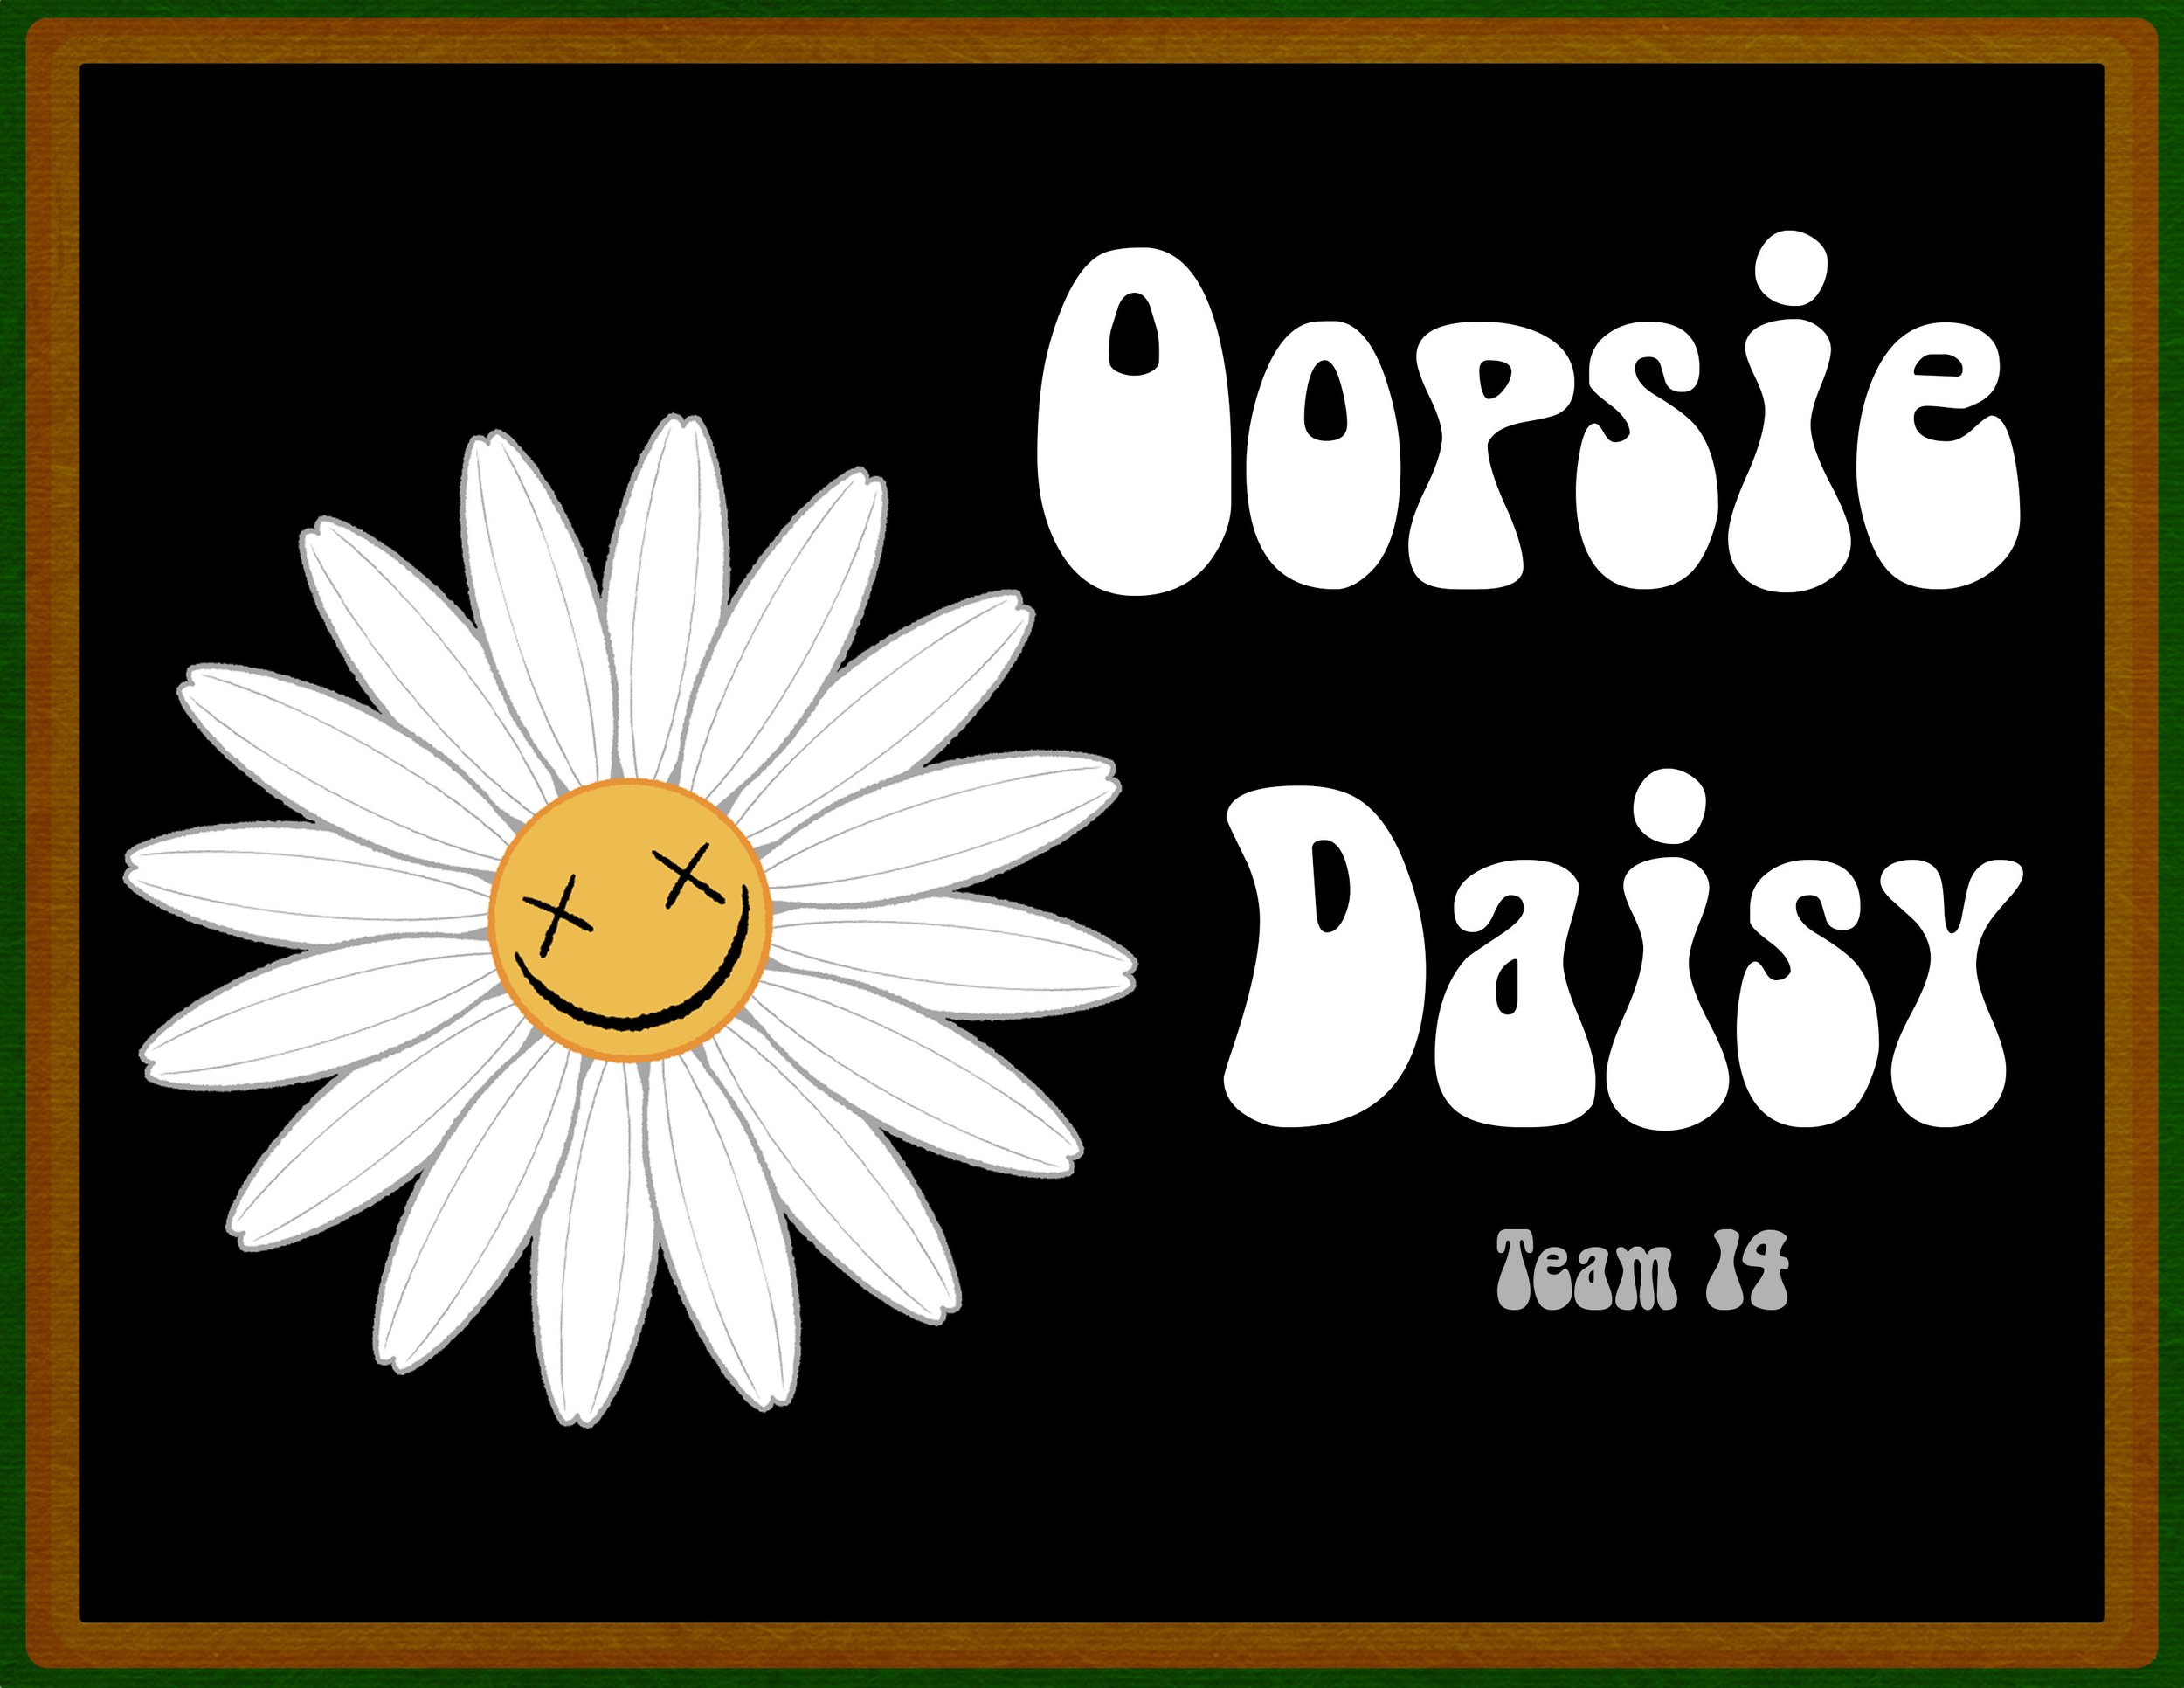 Oopsie Daisy Logo and Information